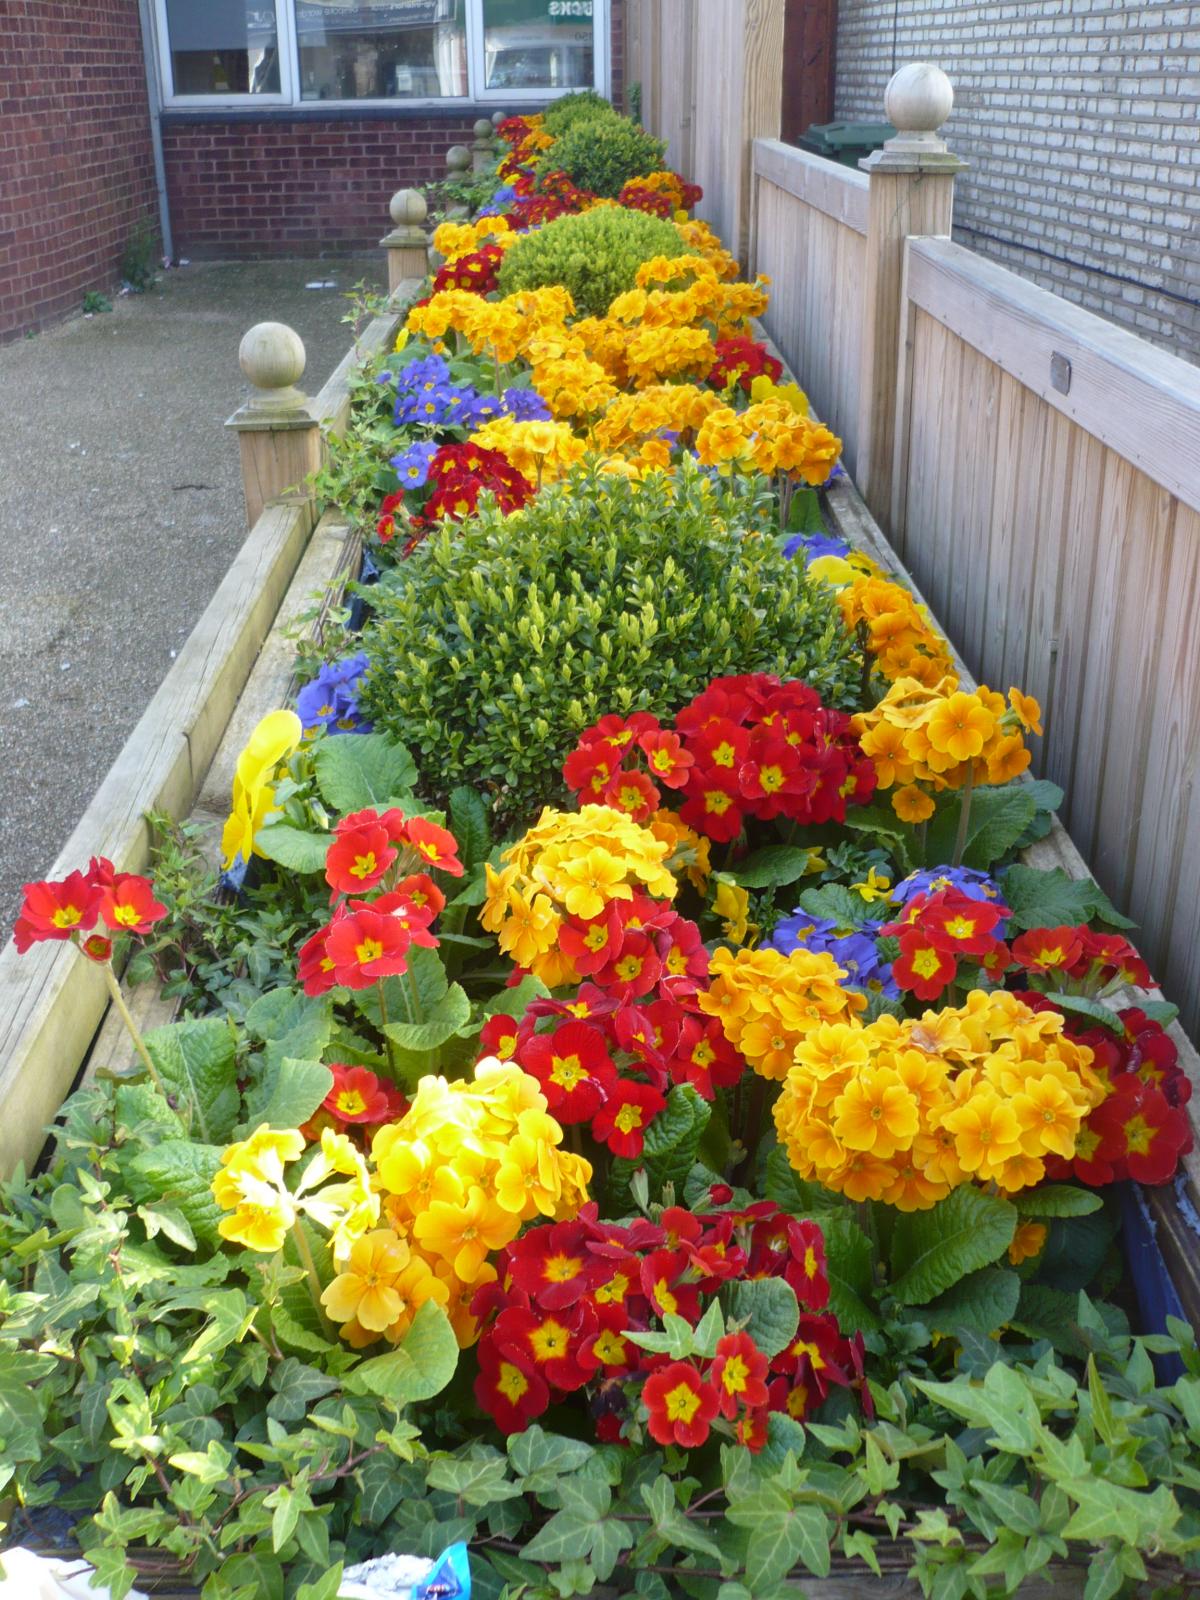 Mr H Noble sent in this photo of the flower boxes in full bloom outside Whitton Library.